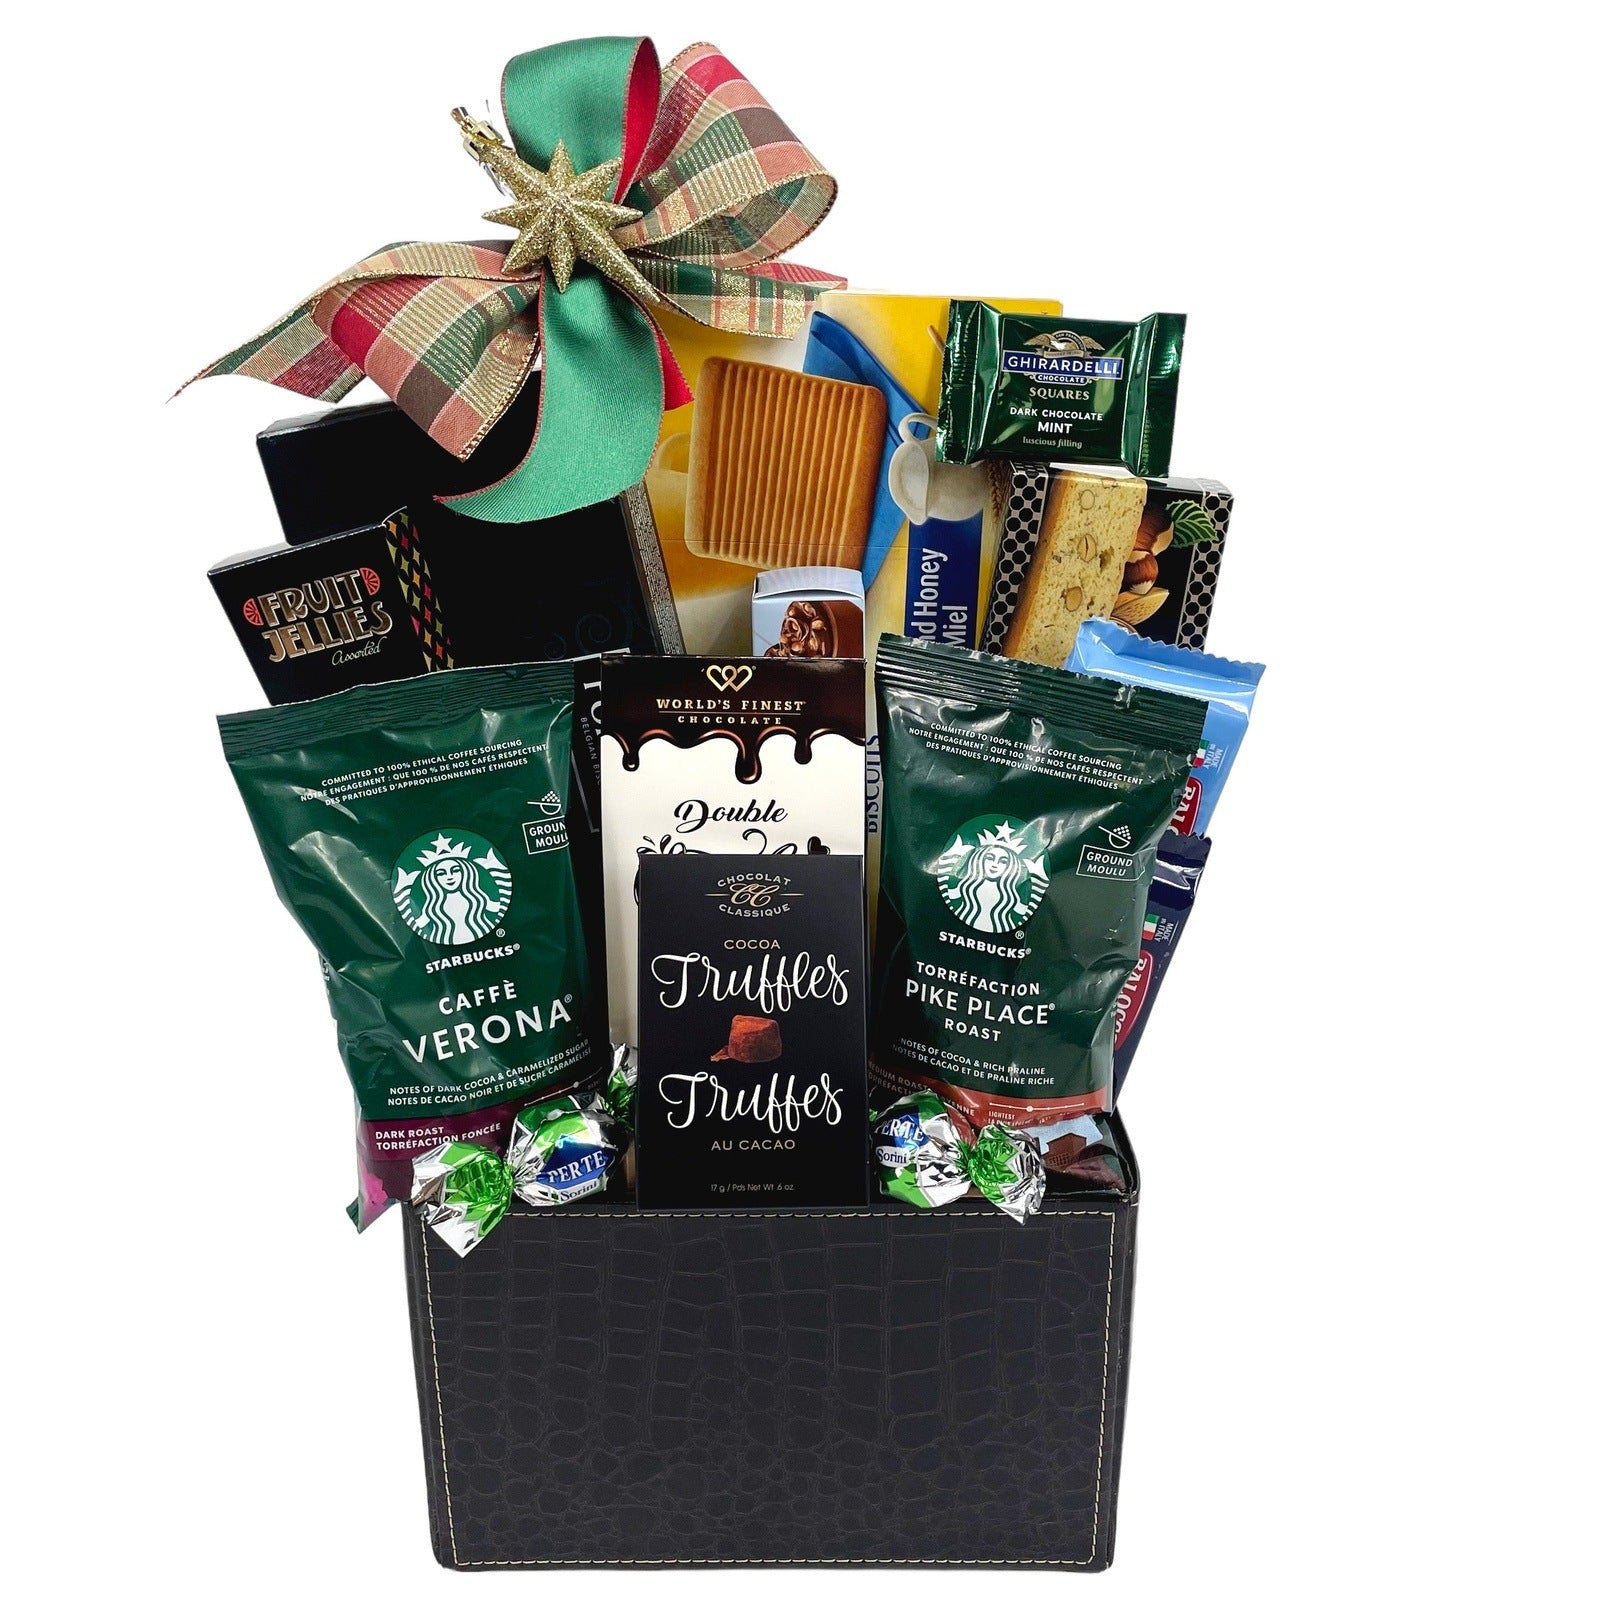 Tea & Coffee Gift Baskets - Same or Next Day Delivery in Any City of US